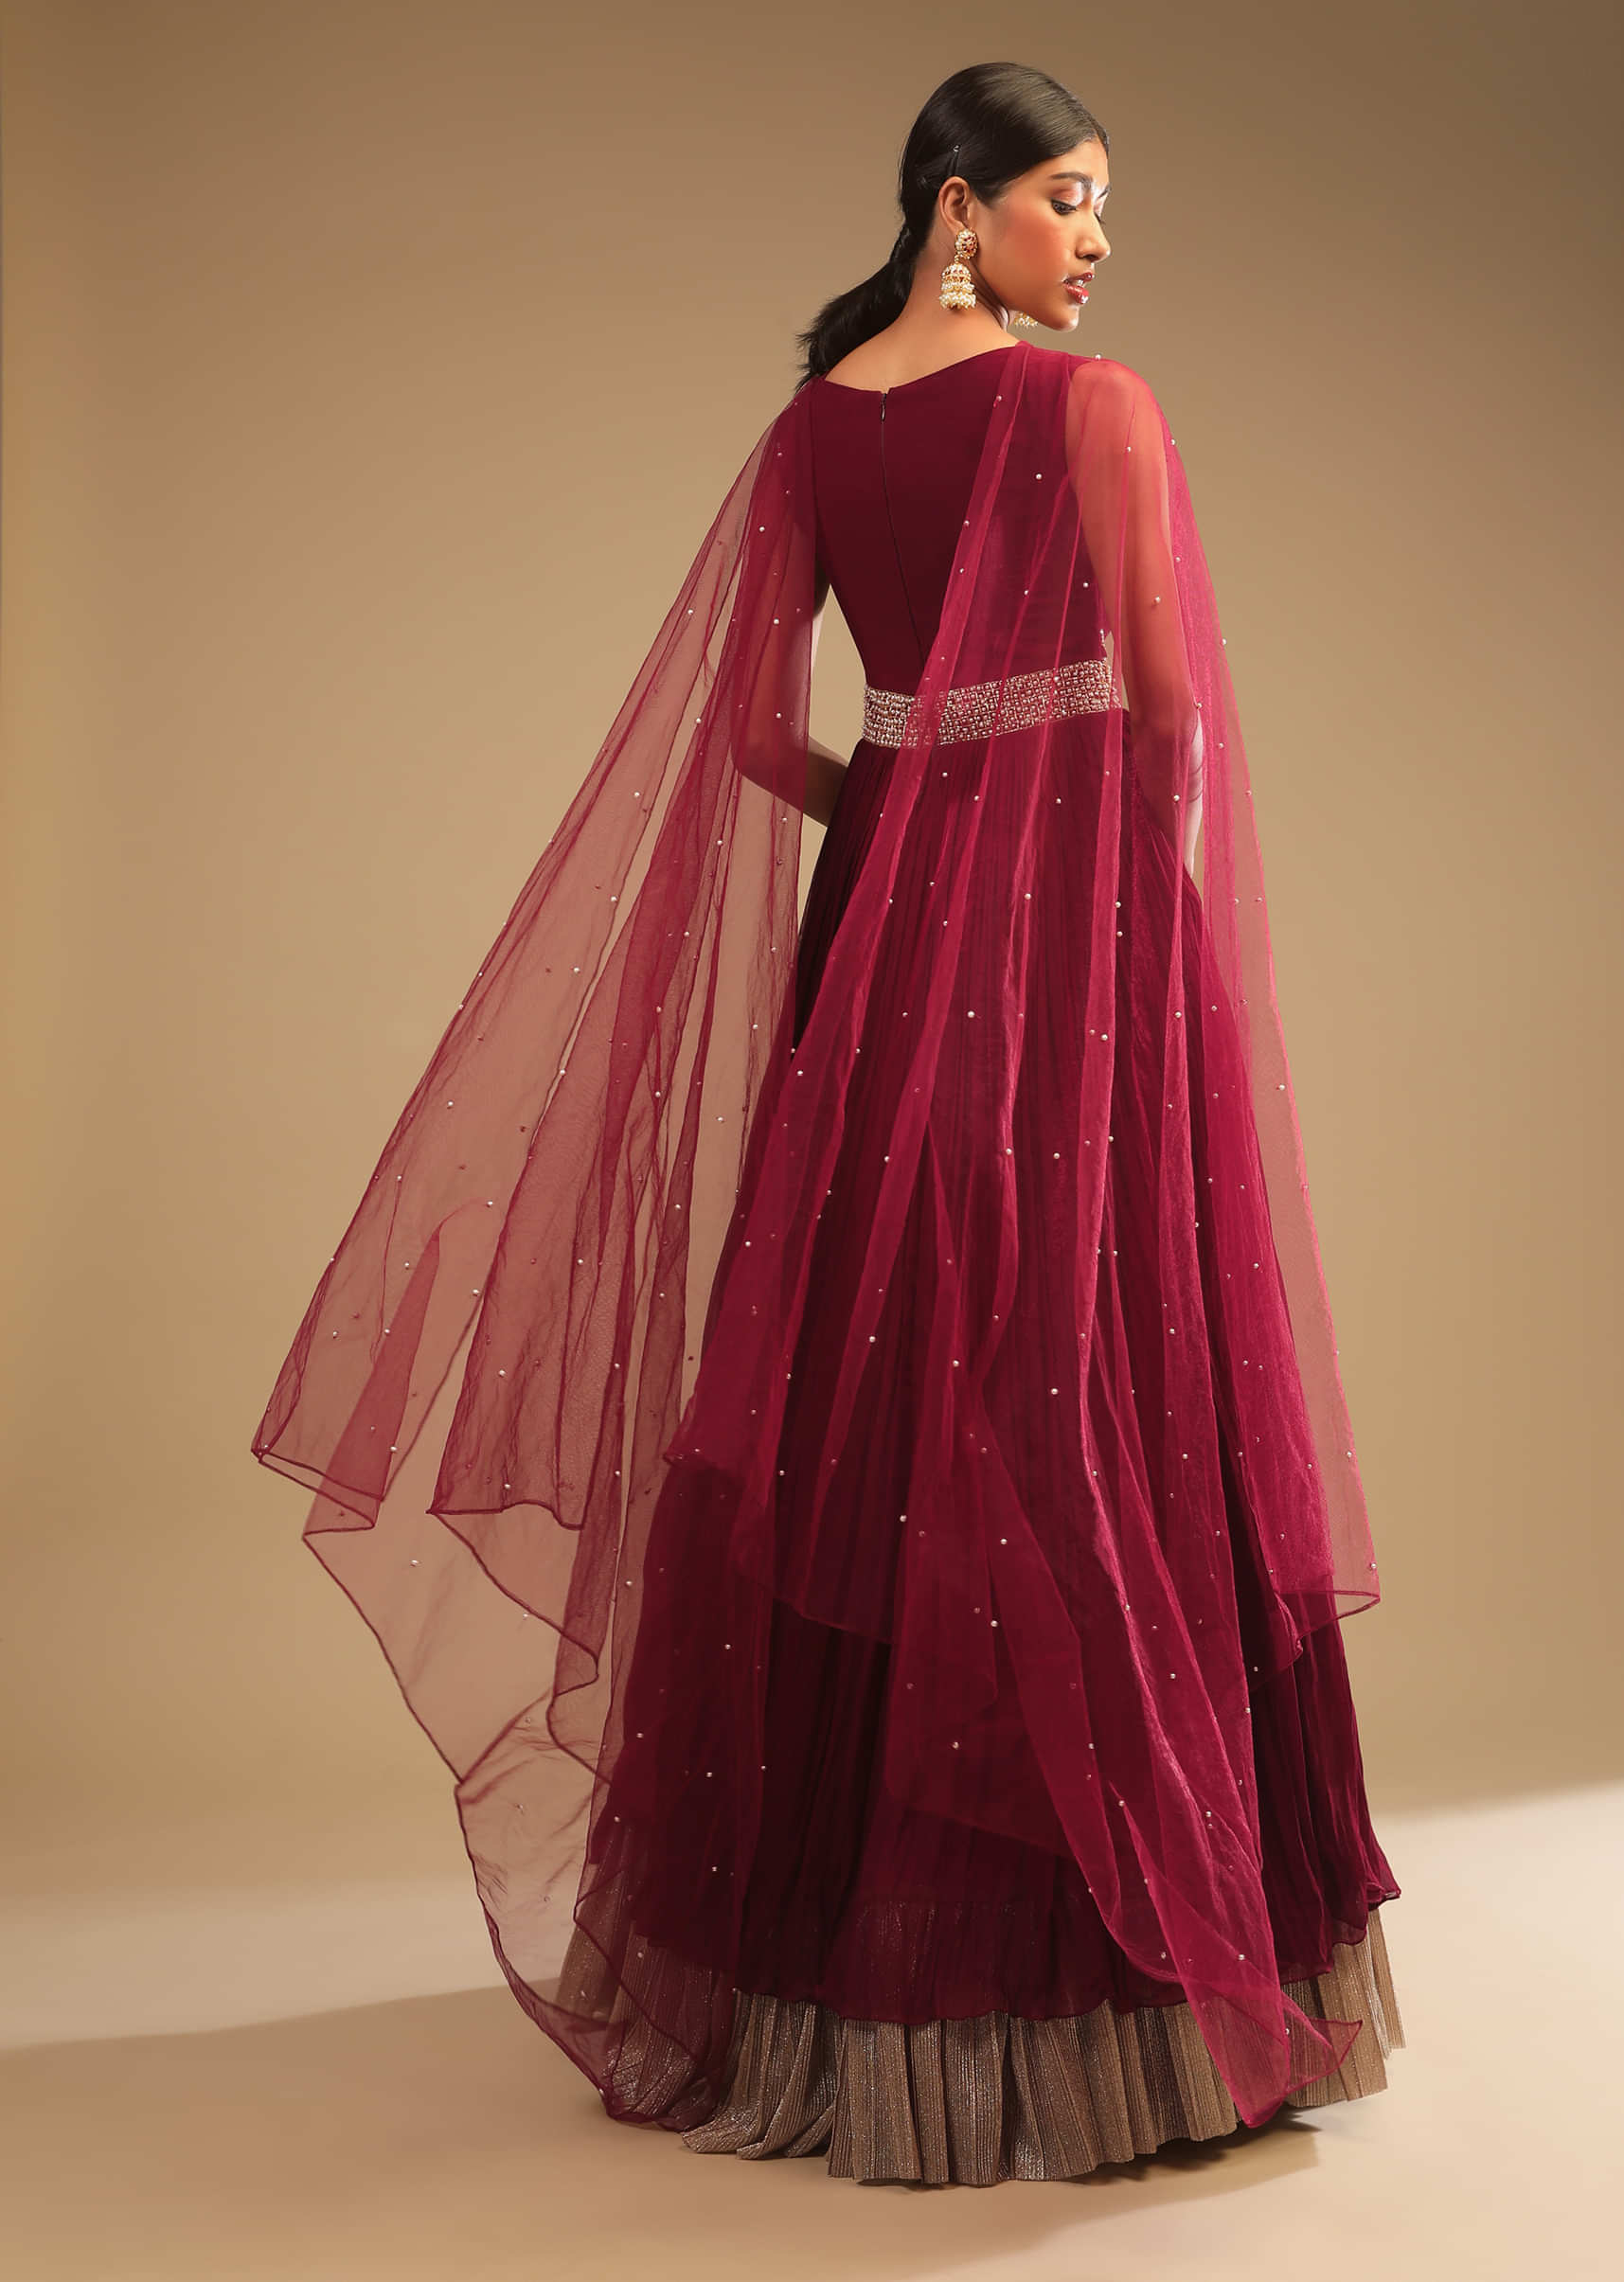 Maroon Anarkali Suit In Georgette With Cut Dana And Moti Embroidered Bodice And Metallic Frill On The Hemline  